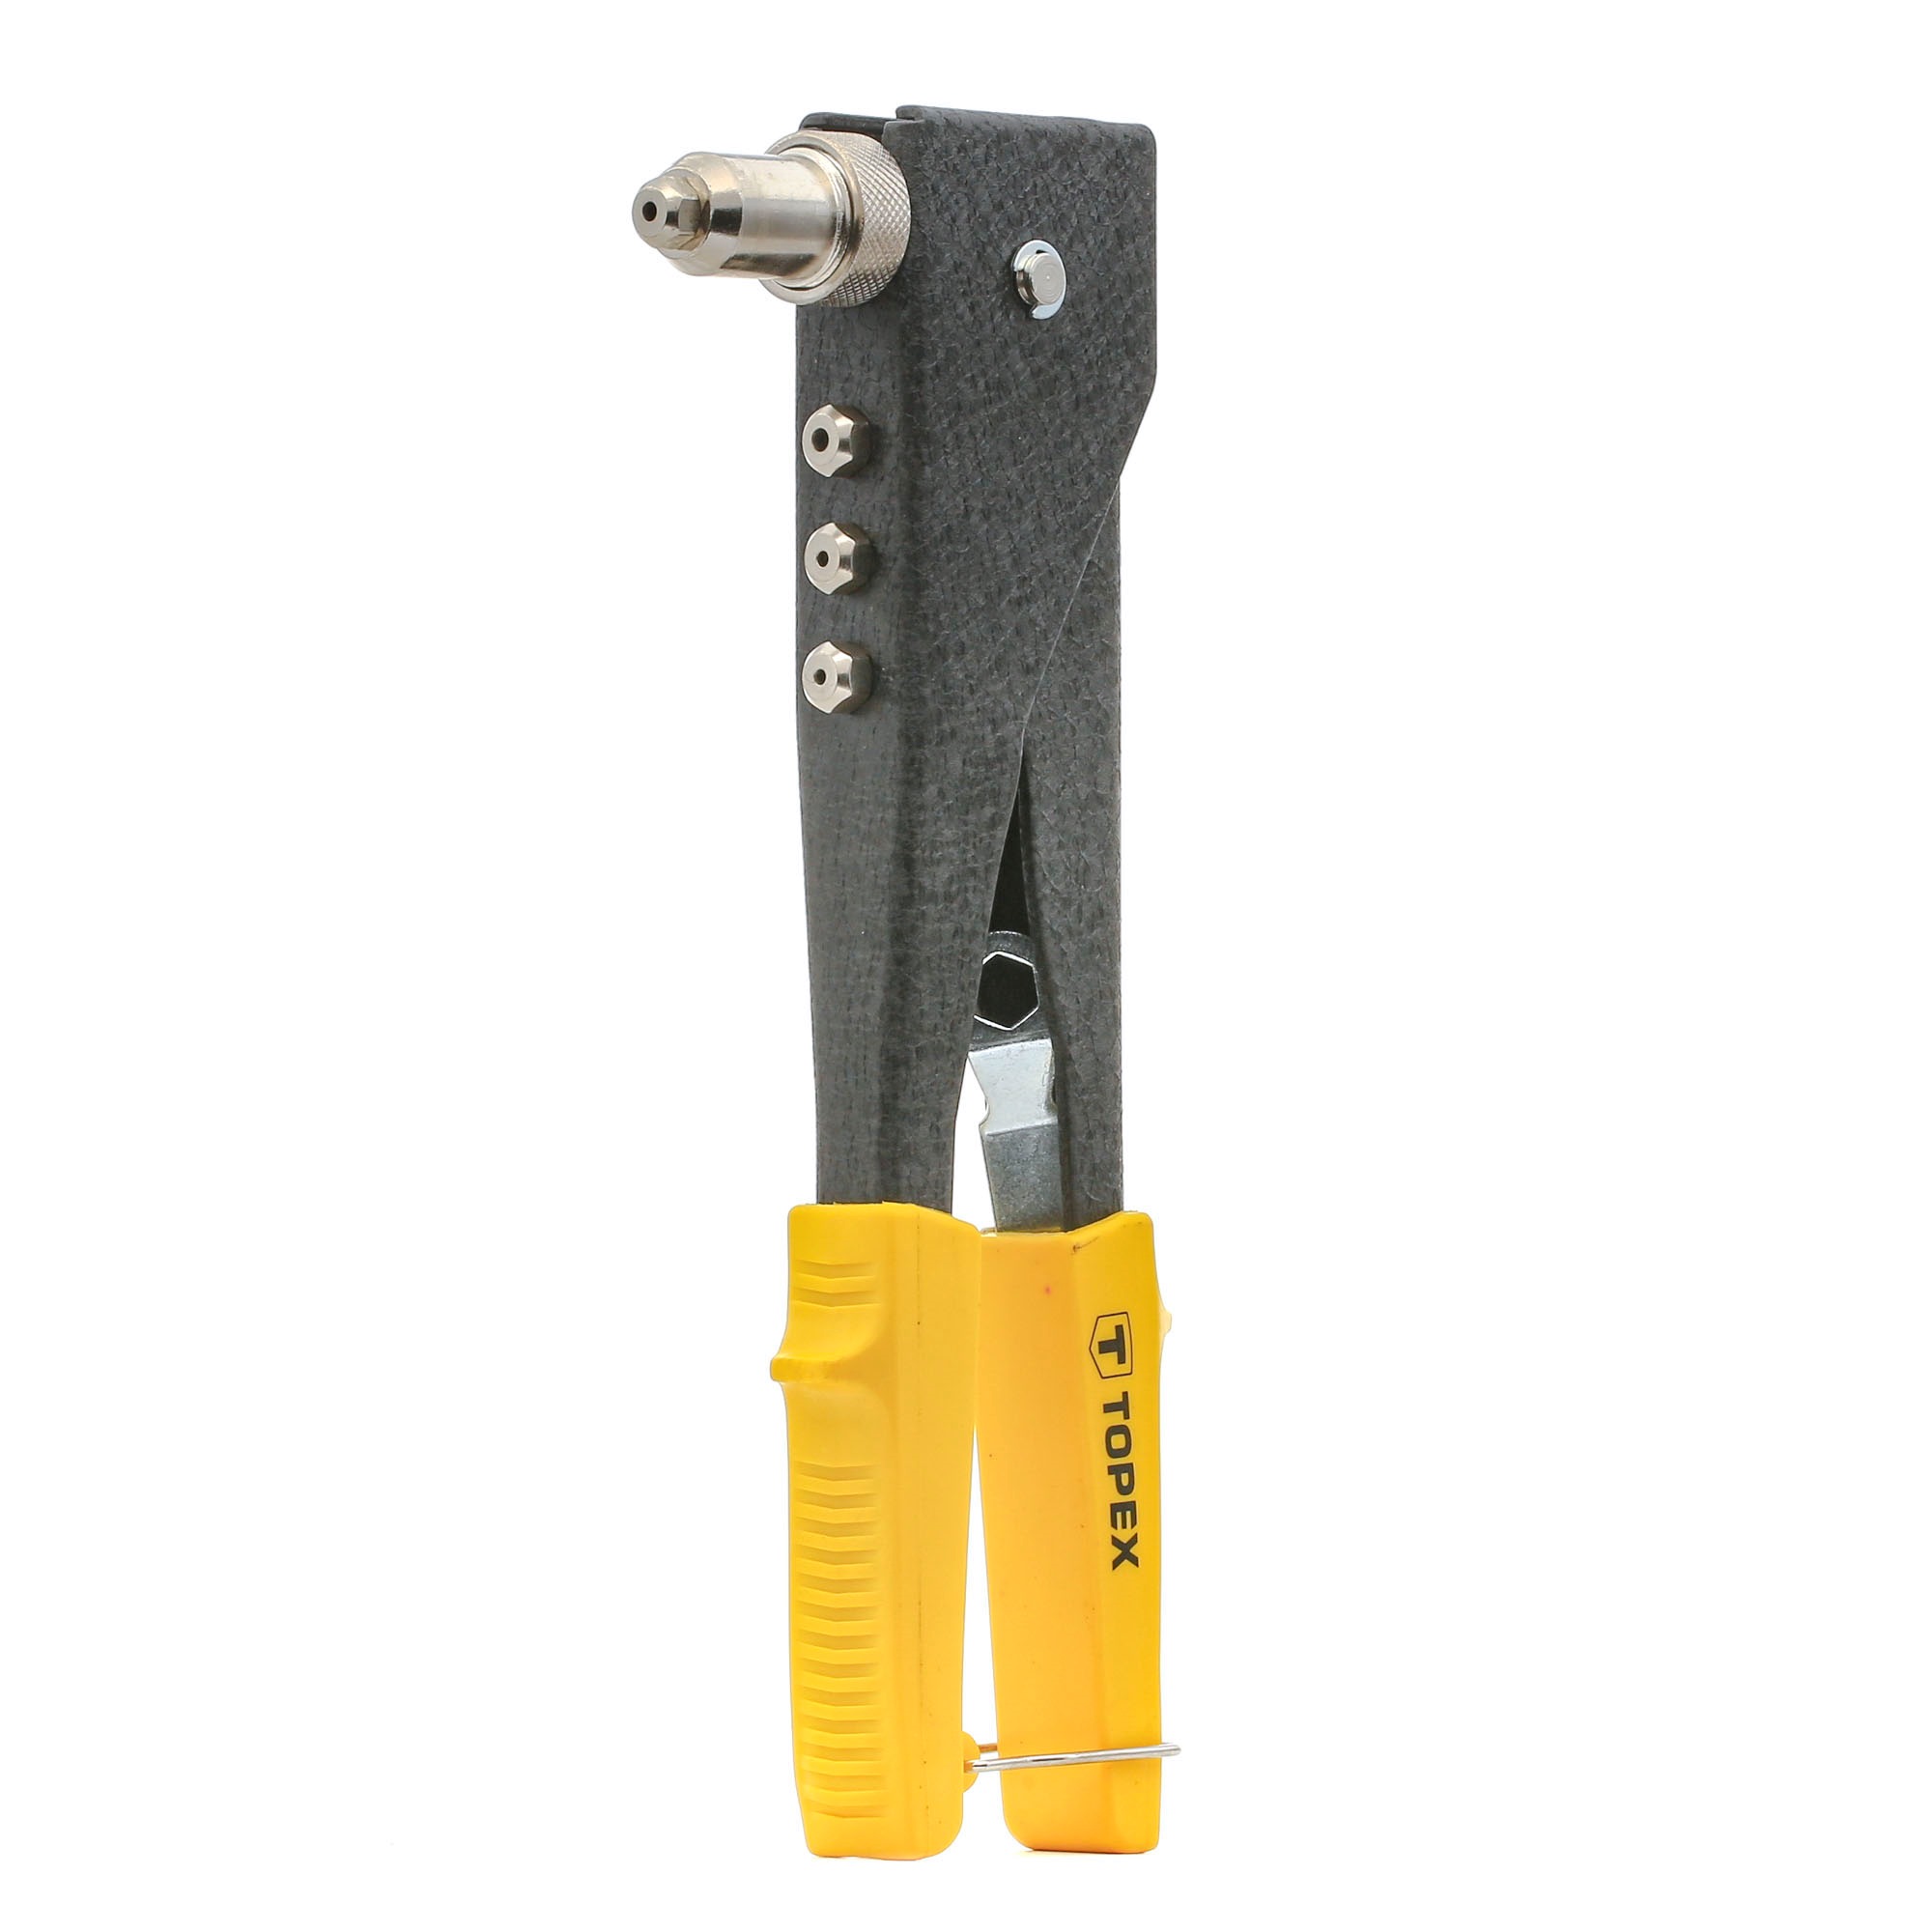 43E712 TOPEX Riveting Pliers - buy online